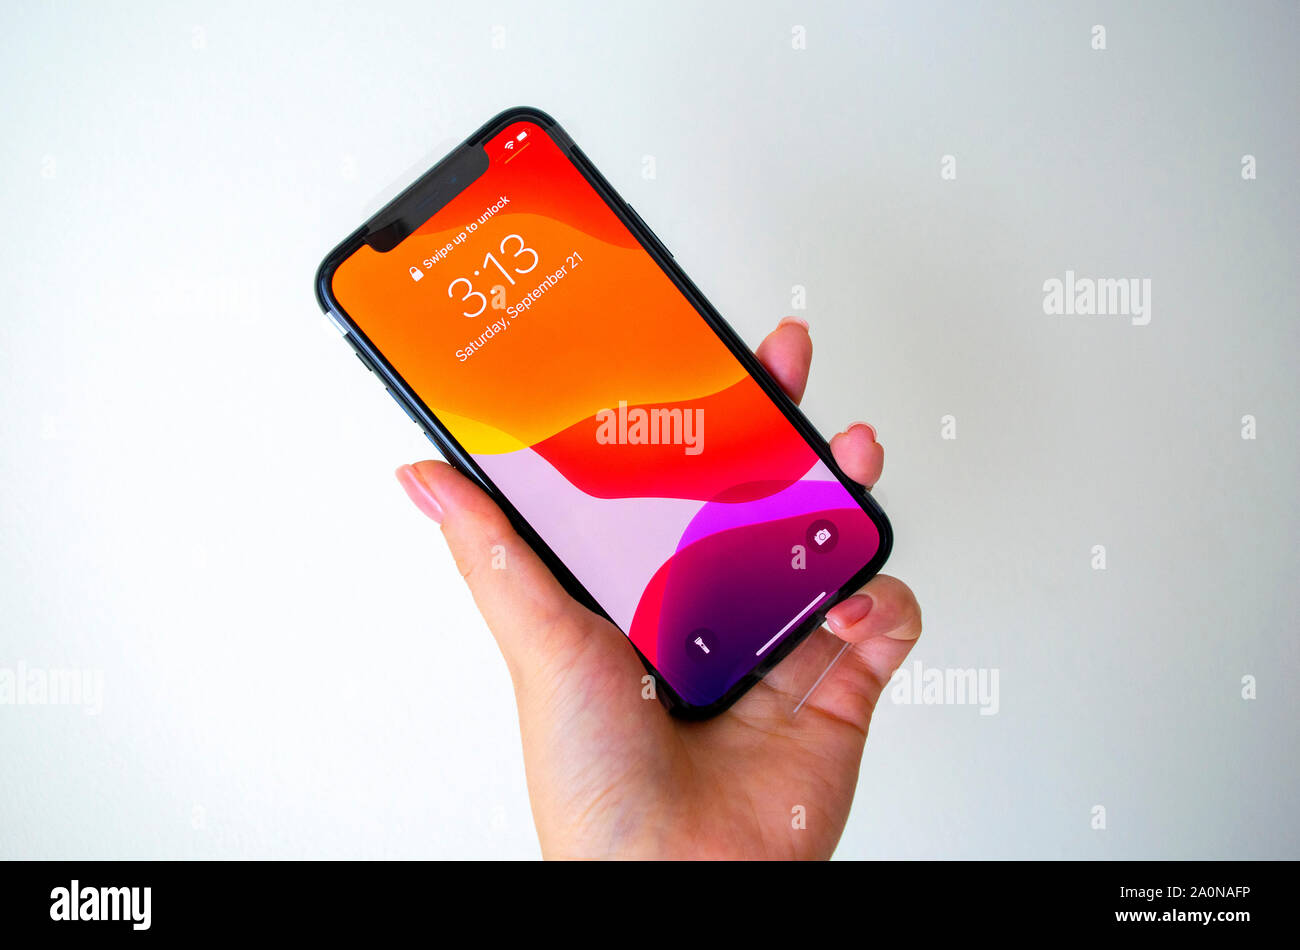 Dubai / UAE - September 21, 2019: iphone 11 pro. Iphone 11 pro. Front side of Apple Iphone 11 Pro in hand on light background. Stock Photo